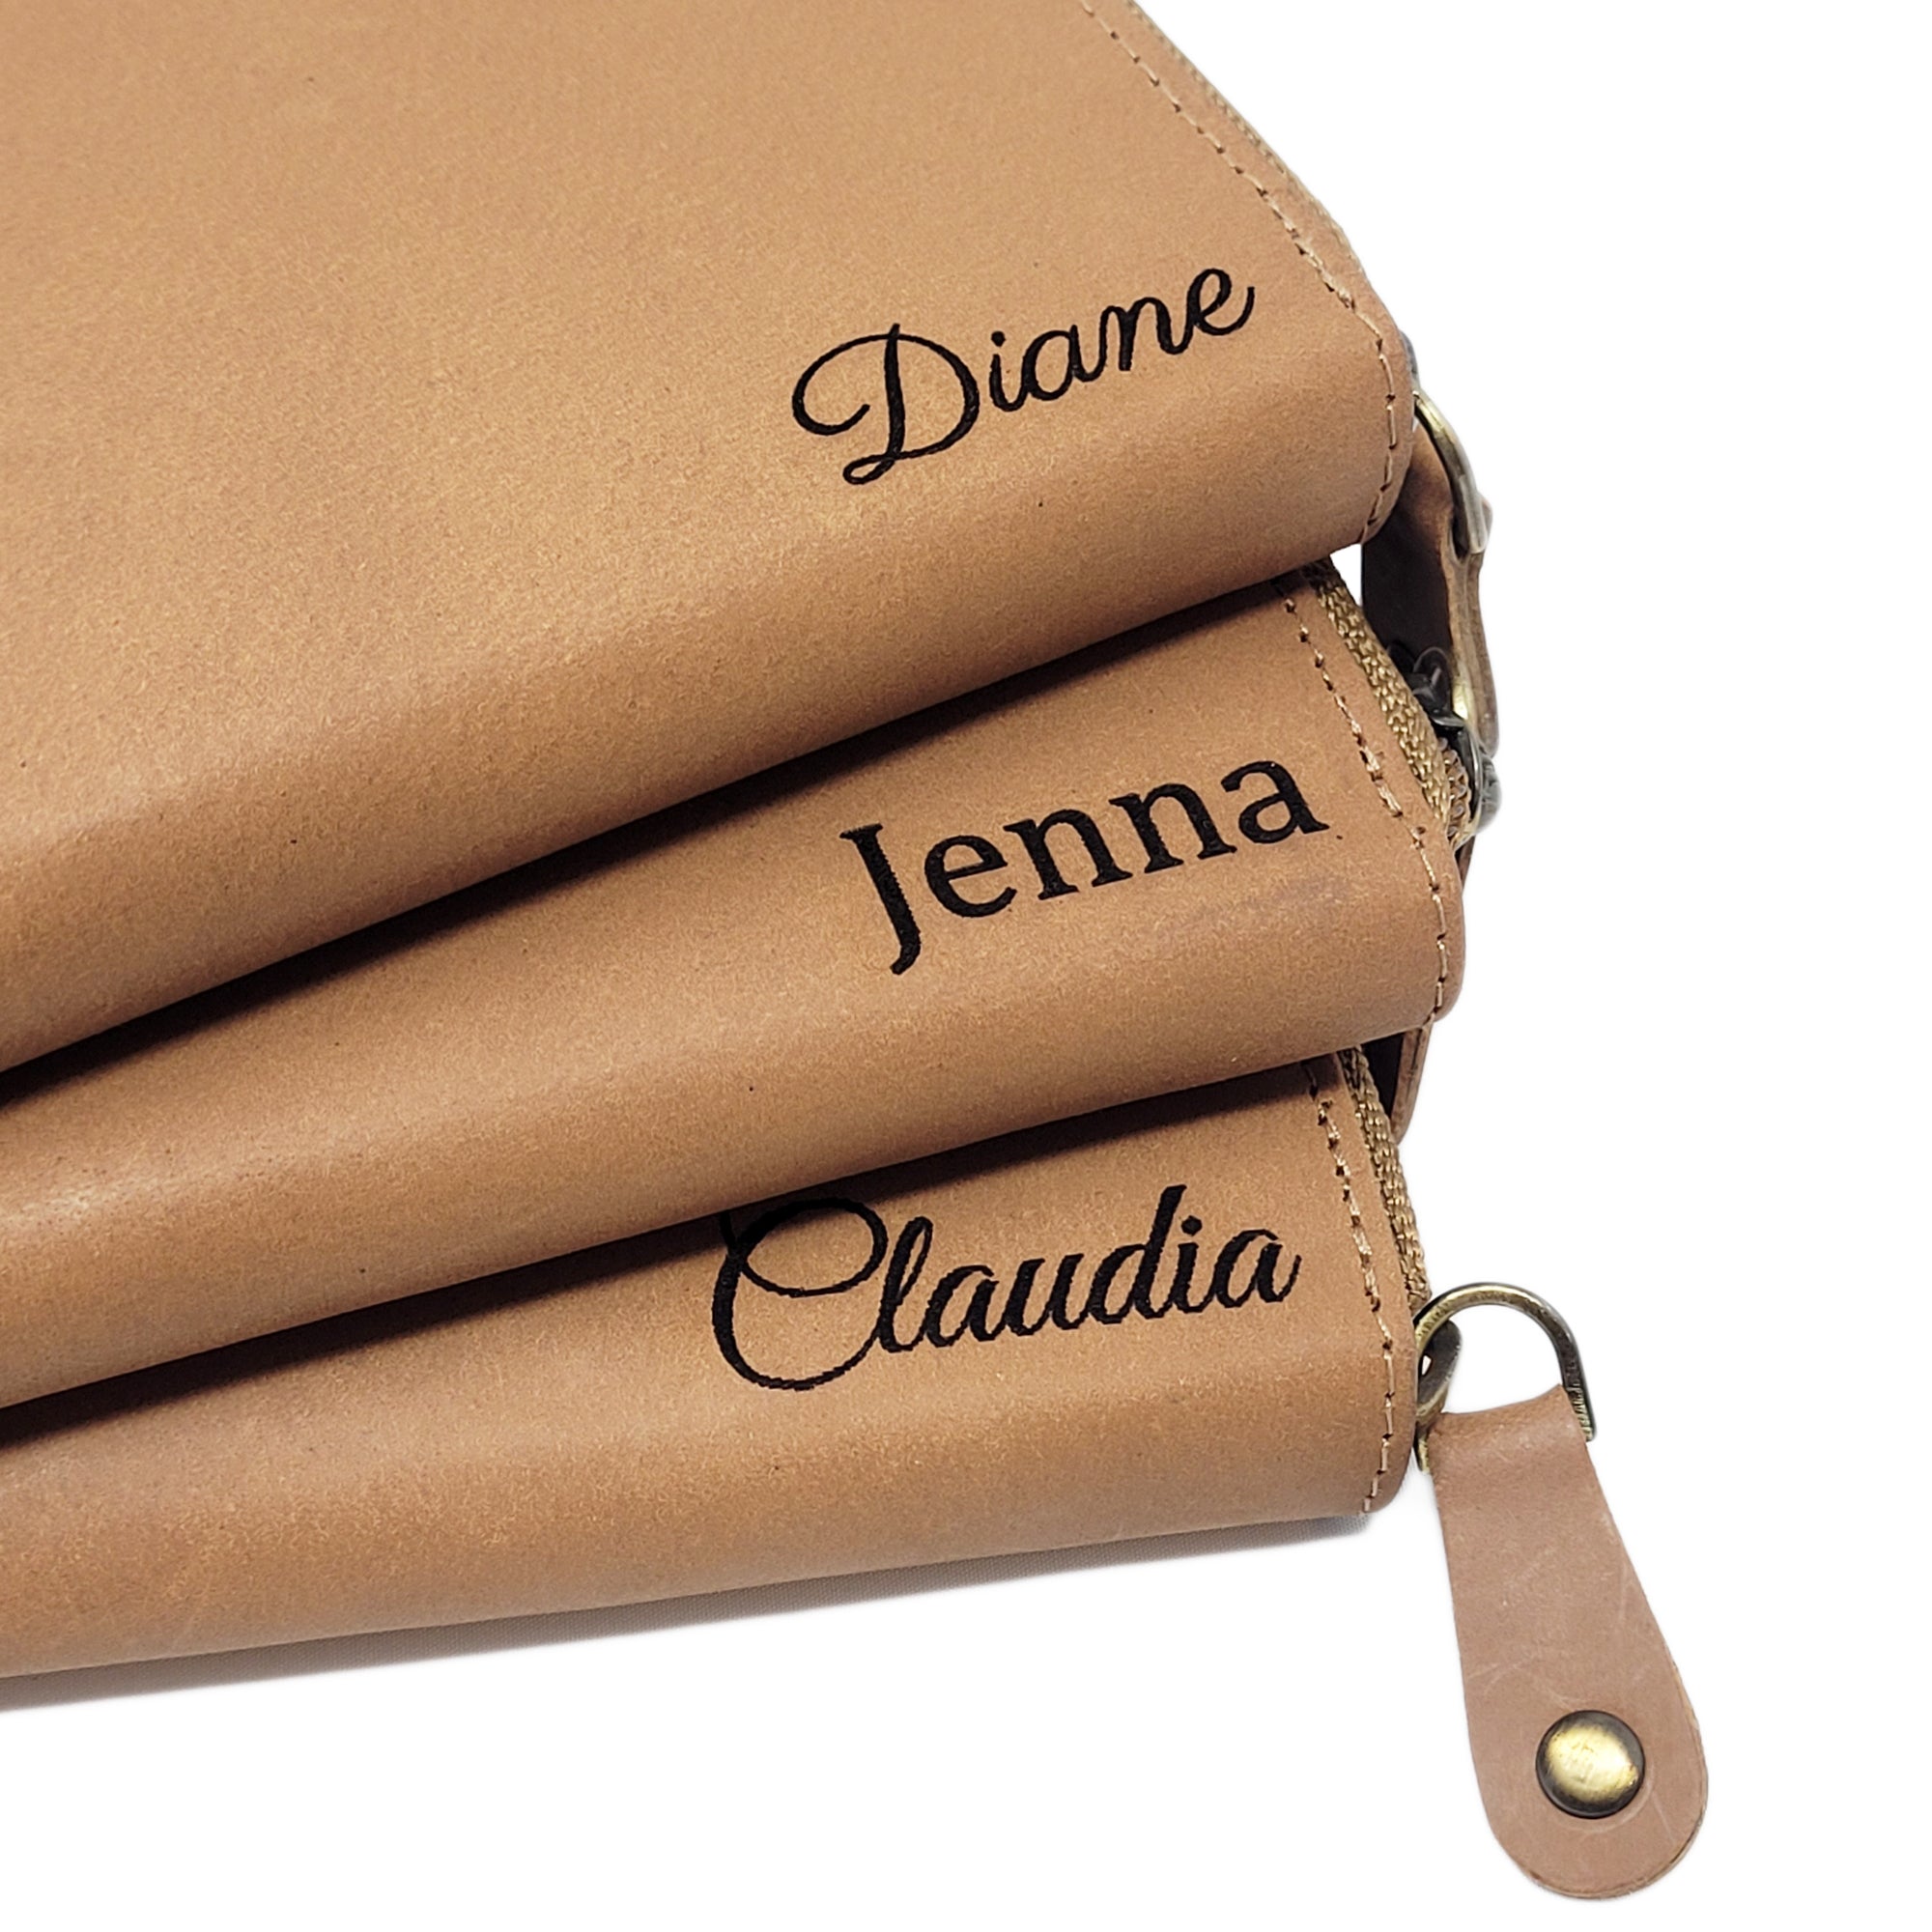 Her and Him Personalized Wallet Set: Gift/Send Fashion and Lifestyle Gifts  Online JVS1185724 |IGP.com